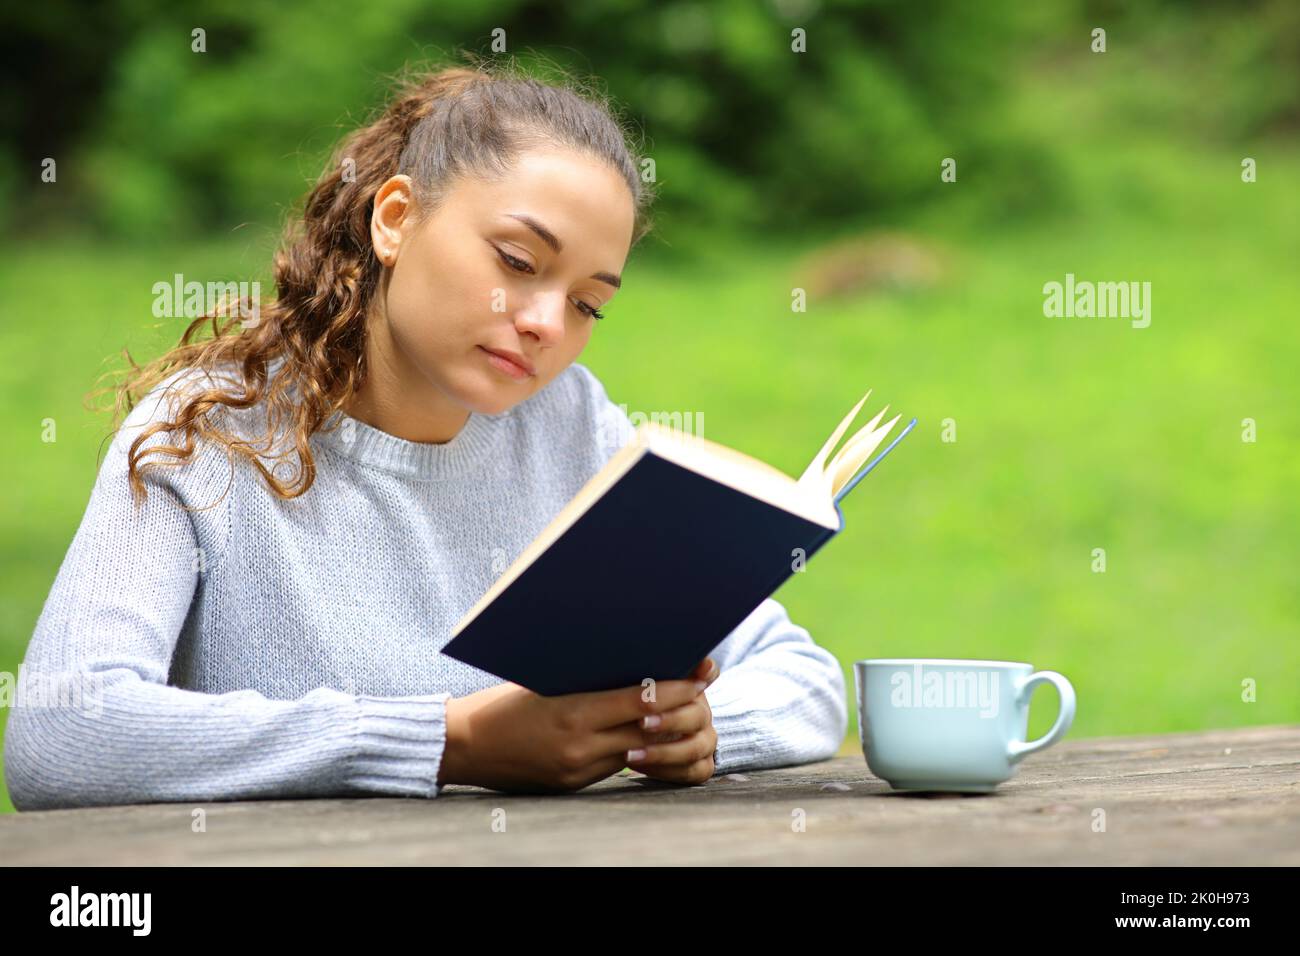 Relaxed woman in a park or camping reading a book Stock Photo